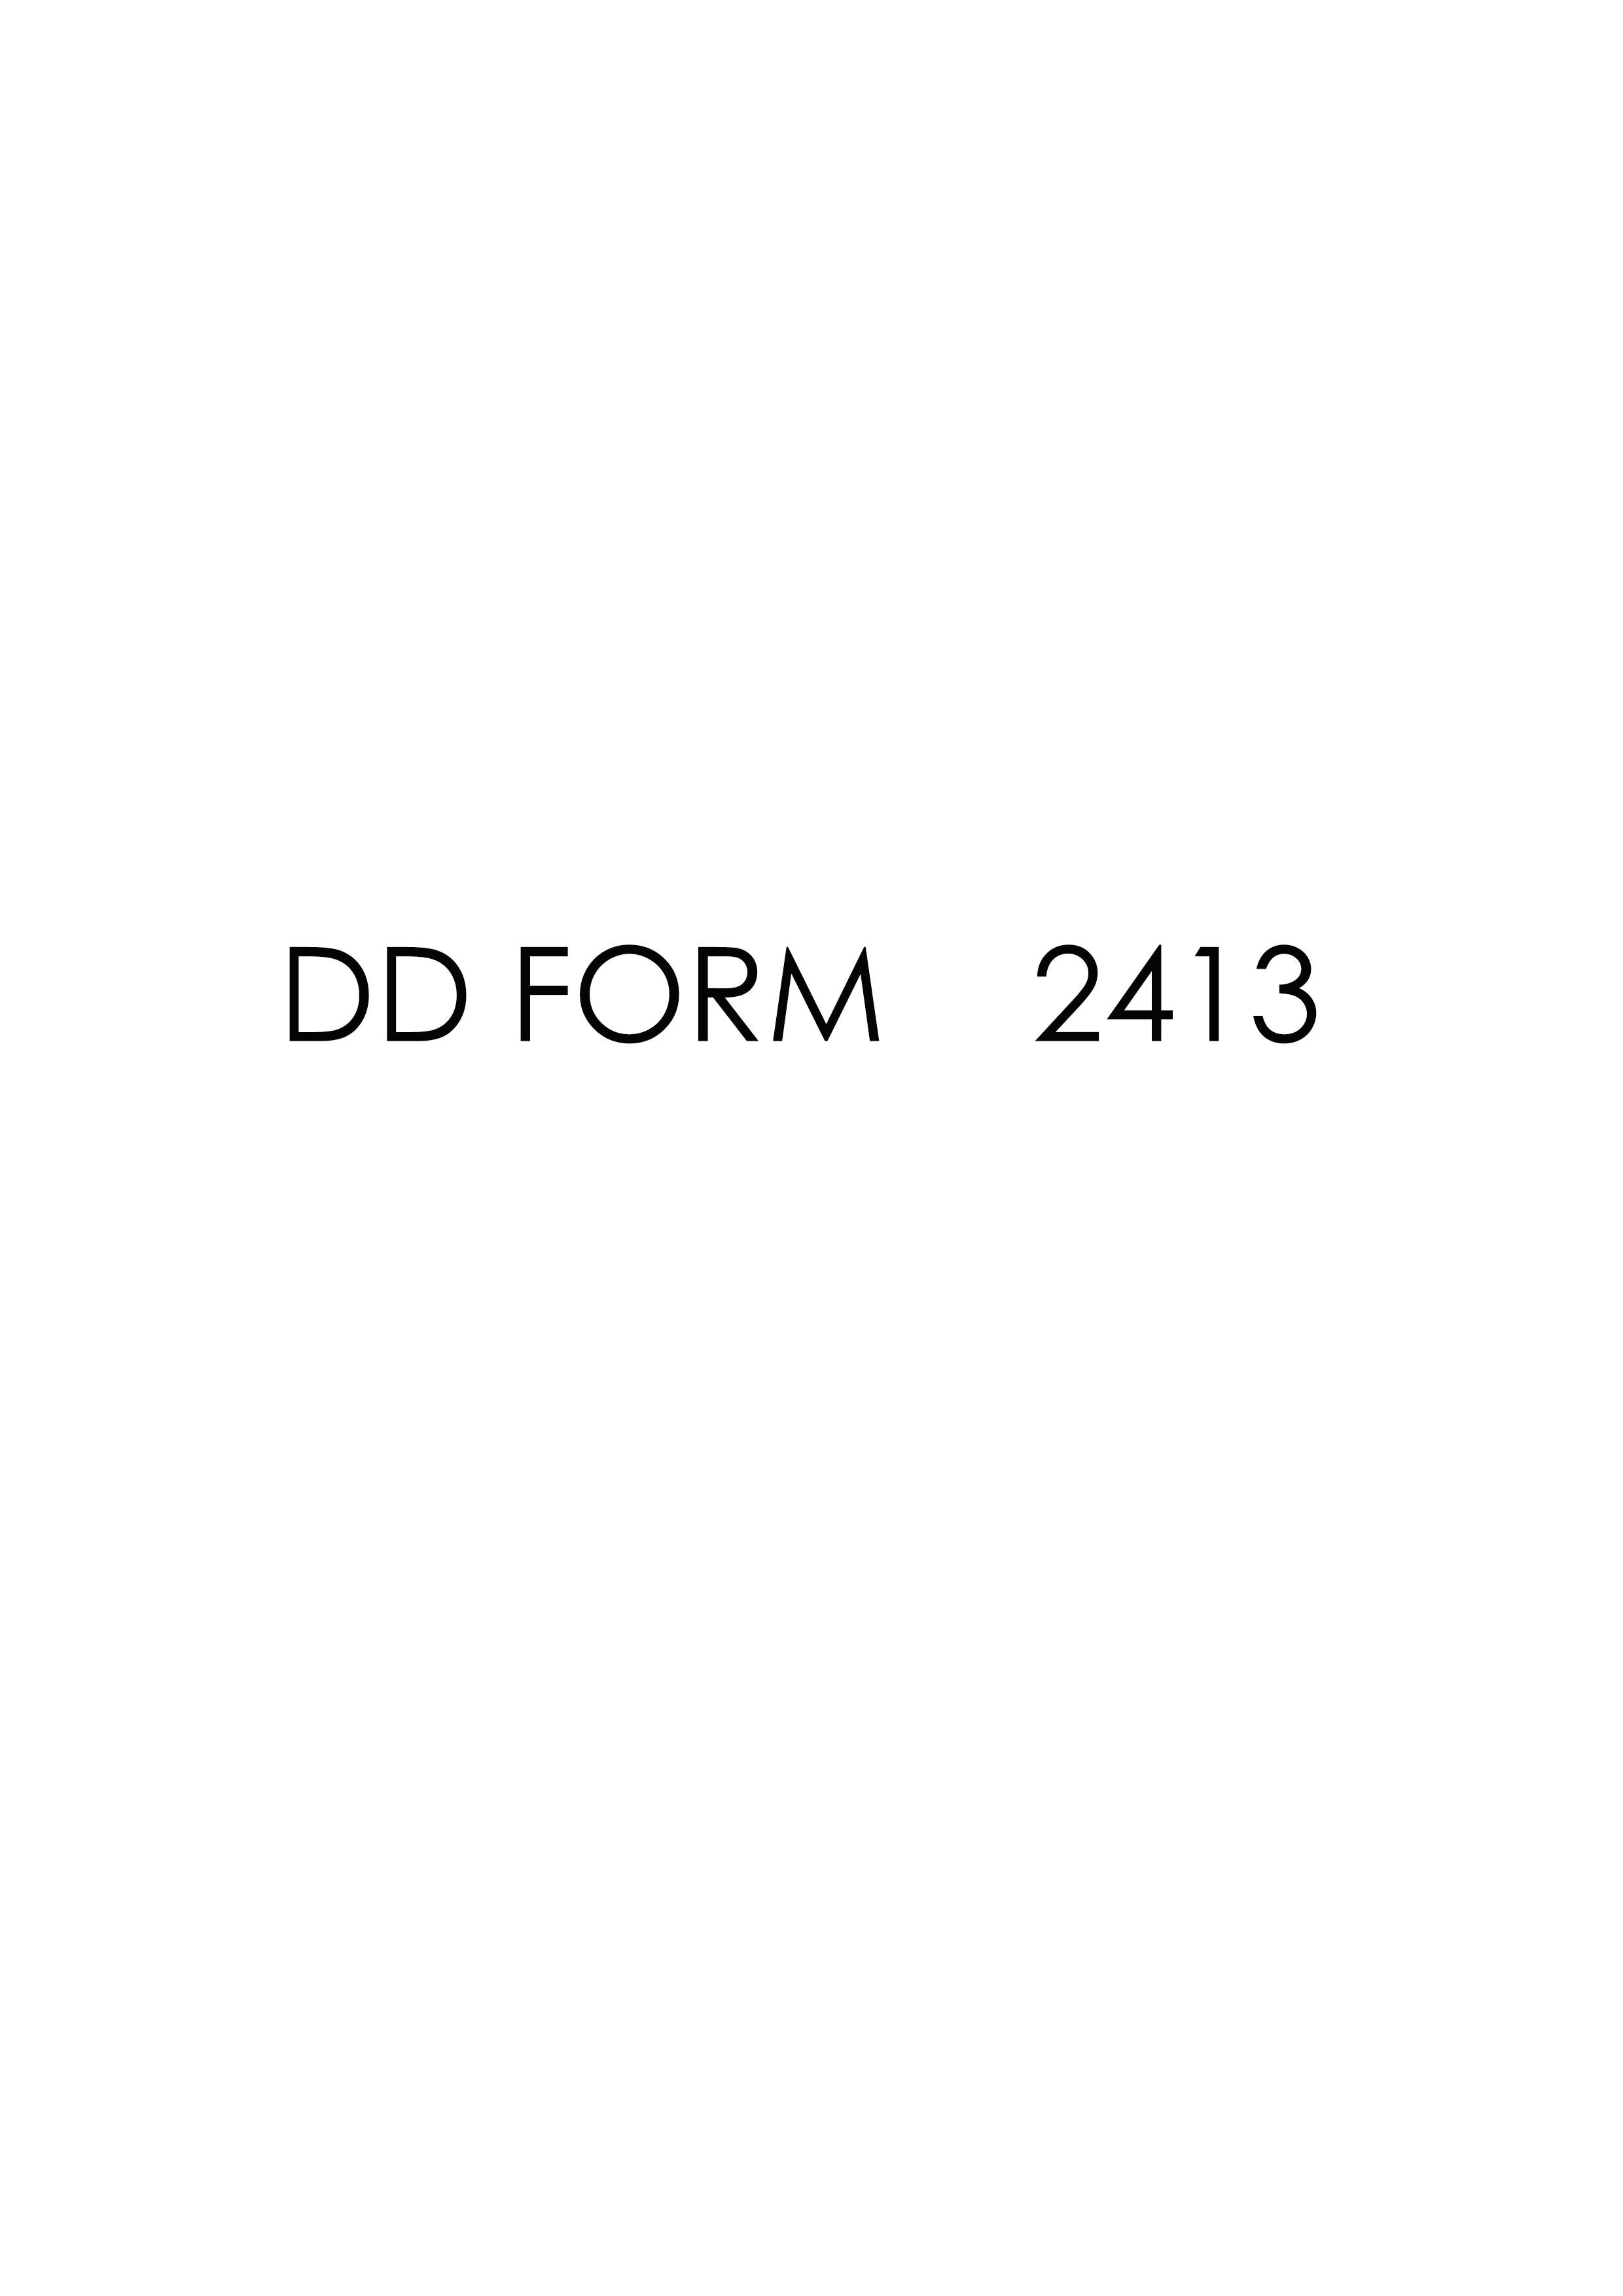 Download Fillable dd Form 2413